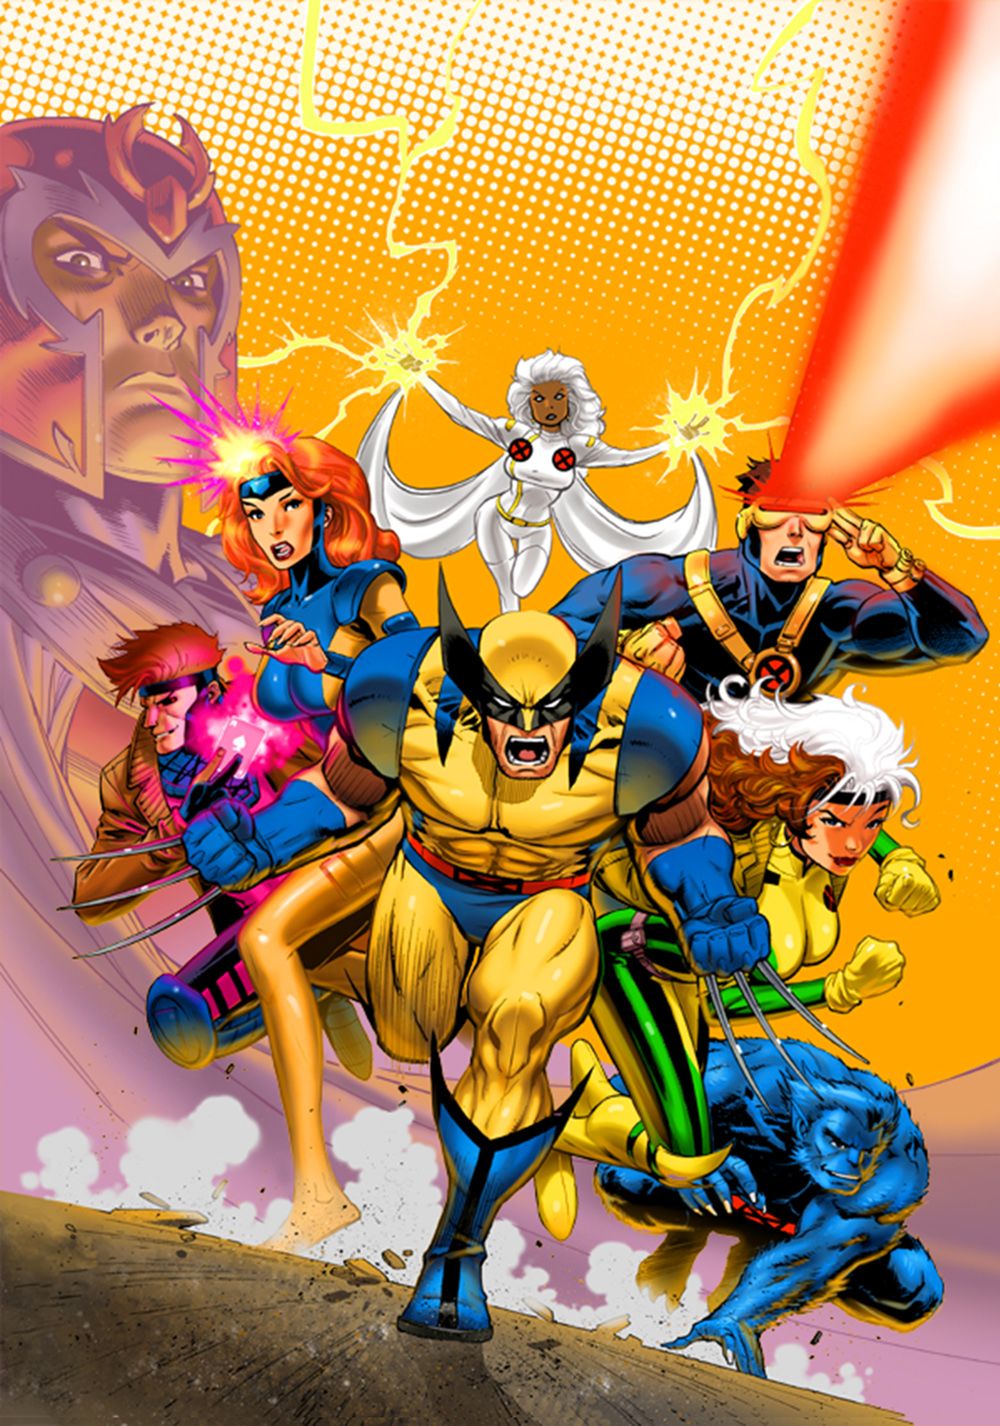 X Men Hd Wallpapers For Iphone - Infoupdate.org